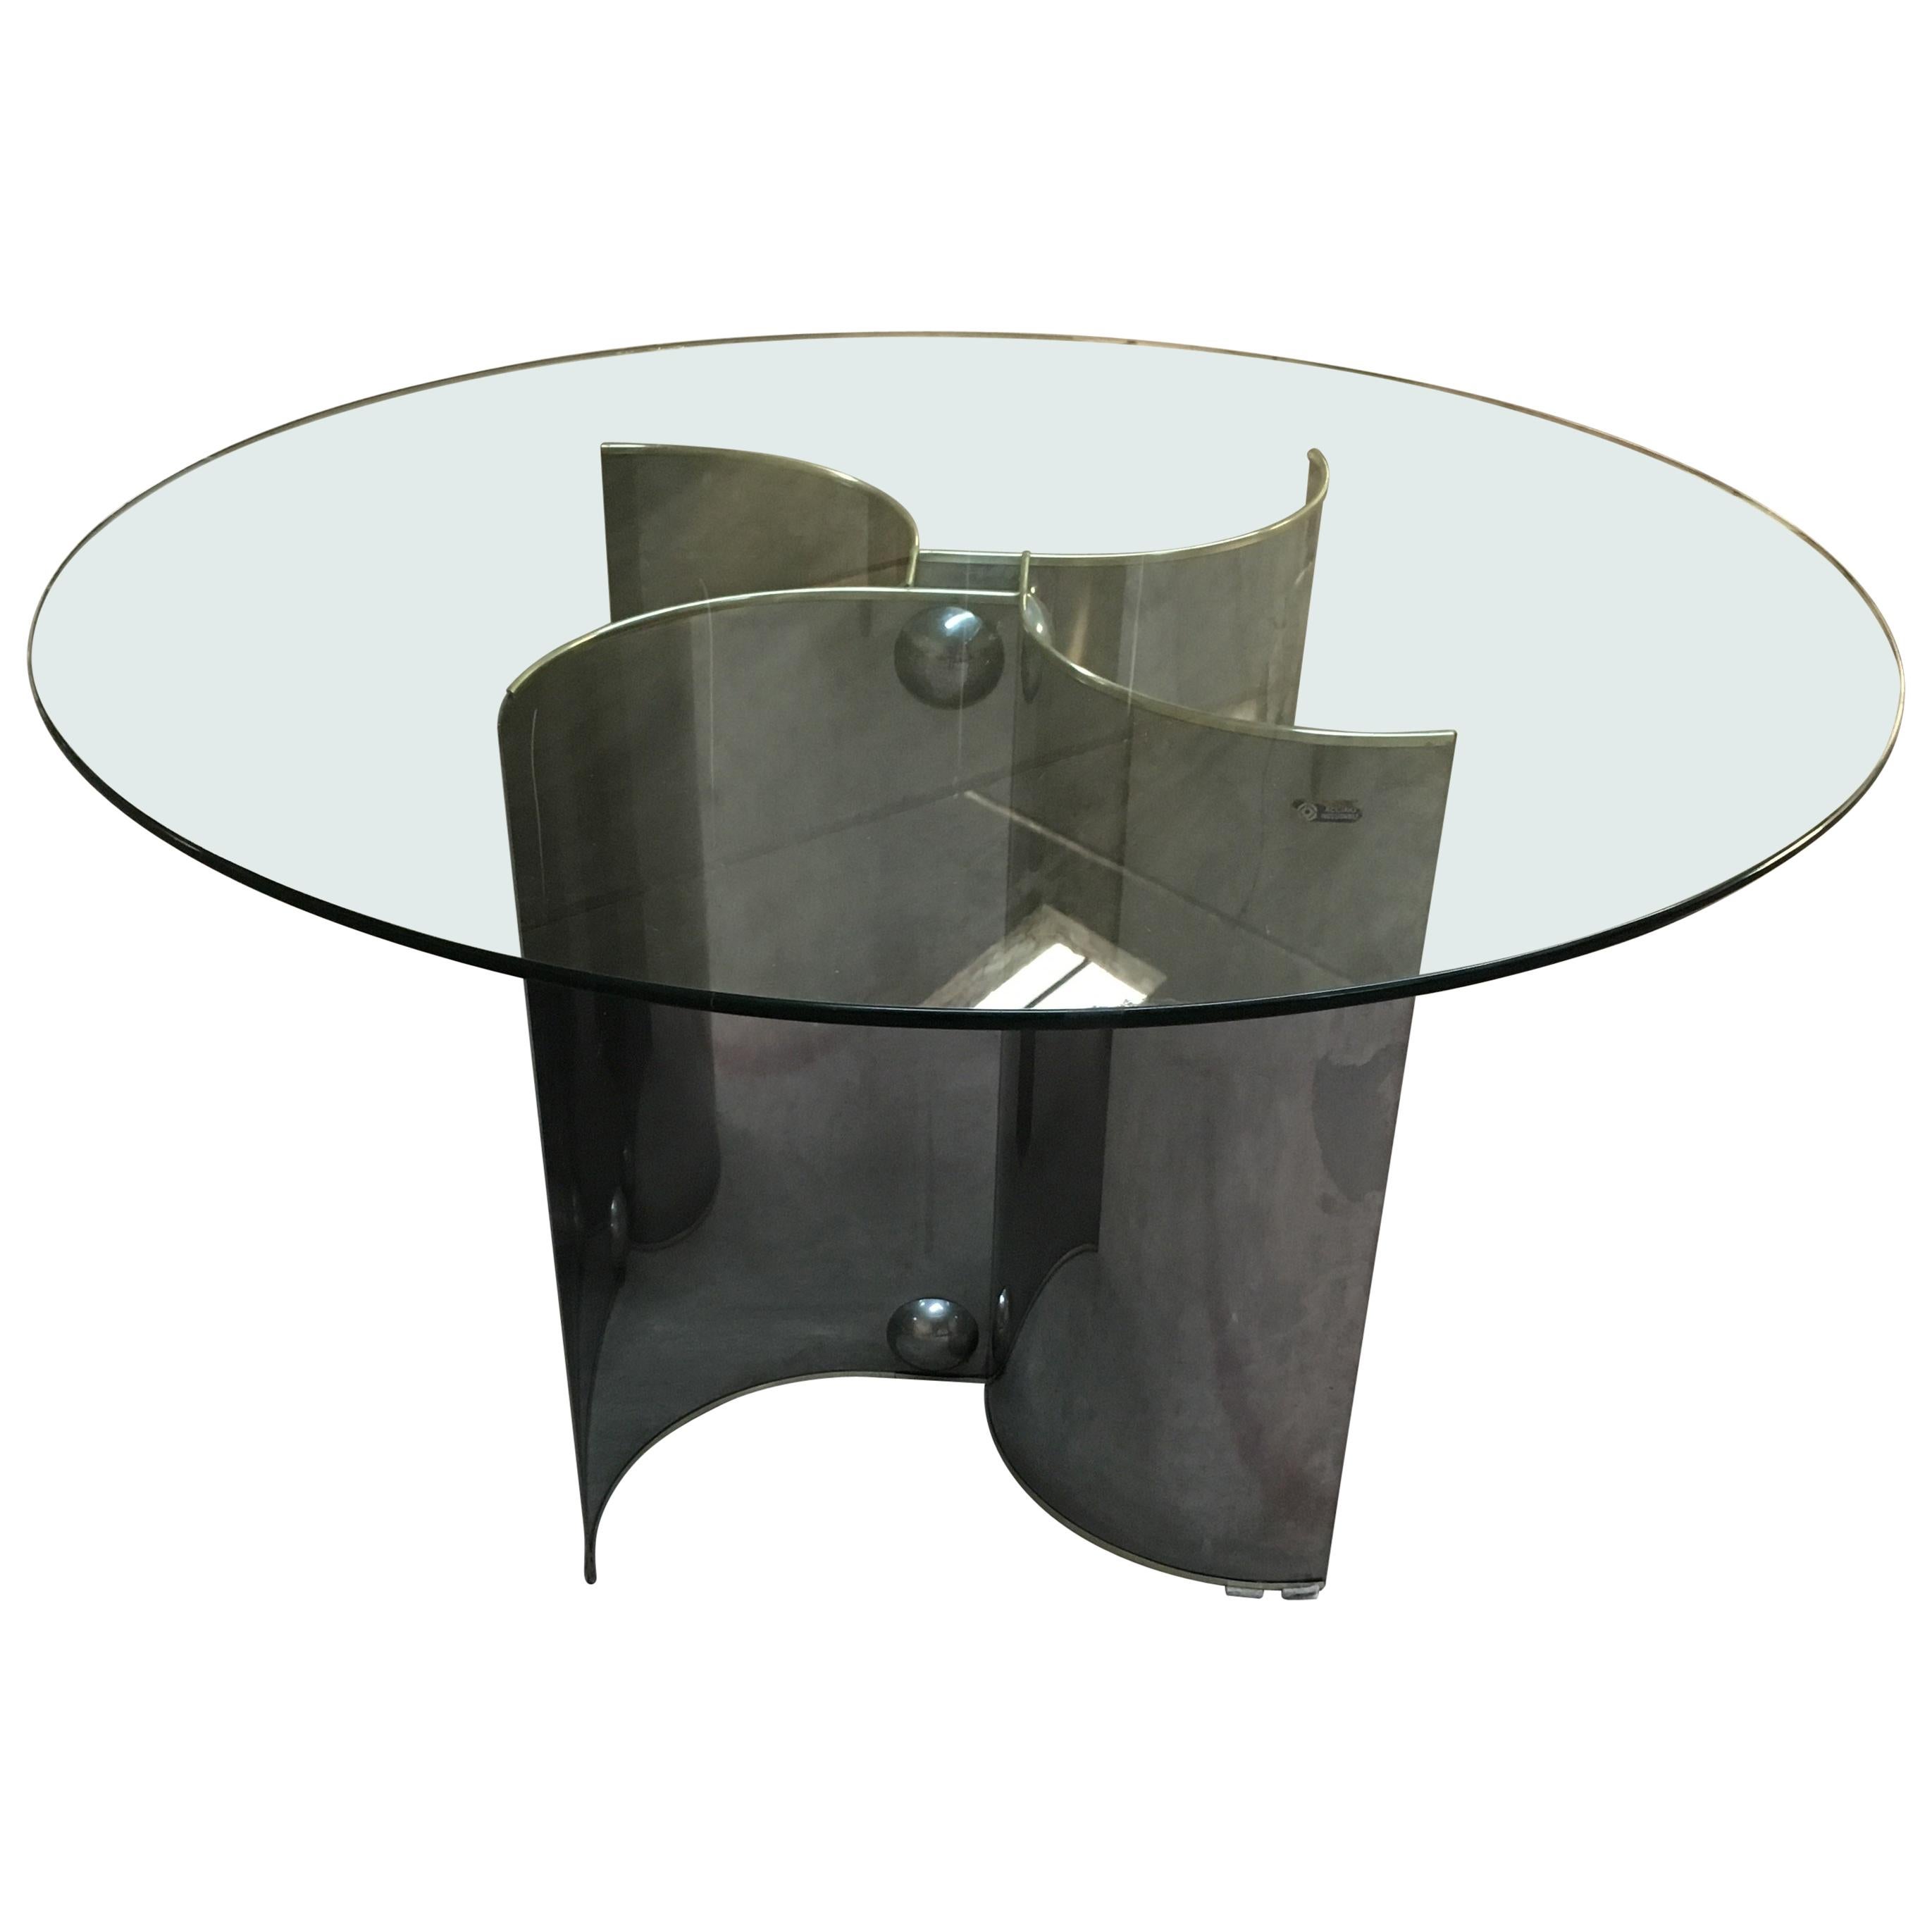 Mid-Century Modern Italian Dining or Center Chrome Based Table with Glass Top